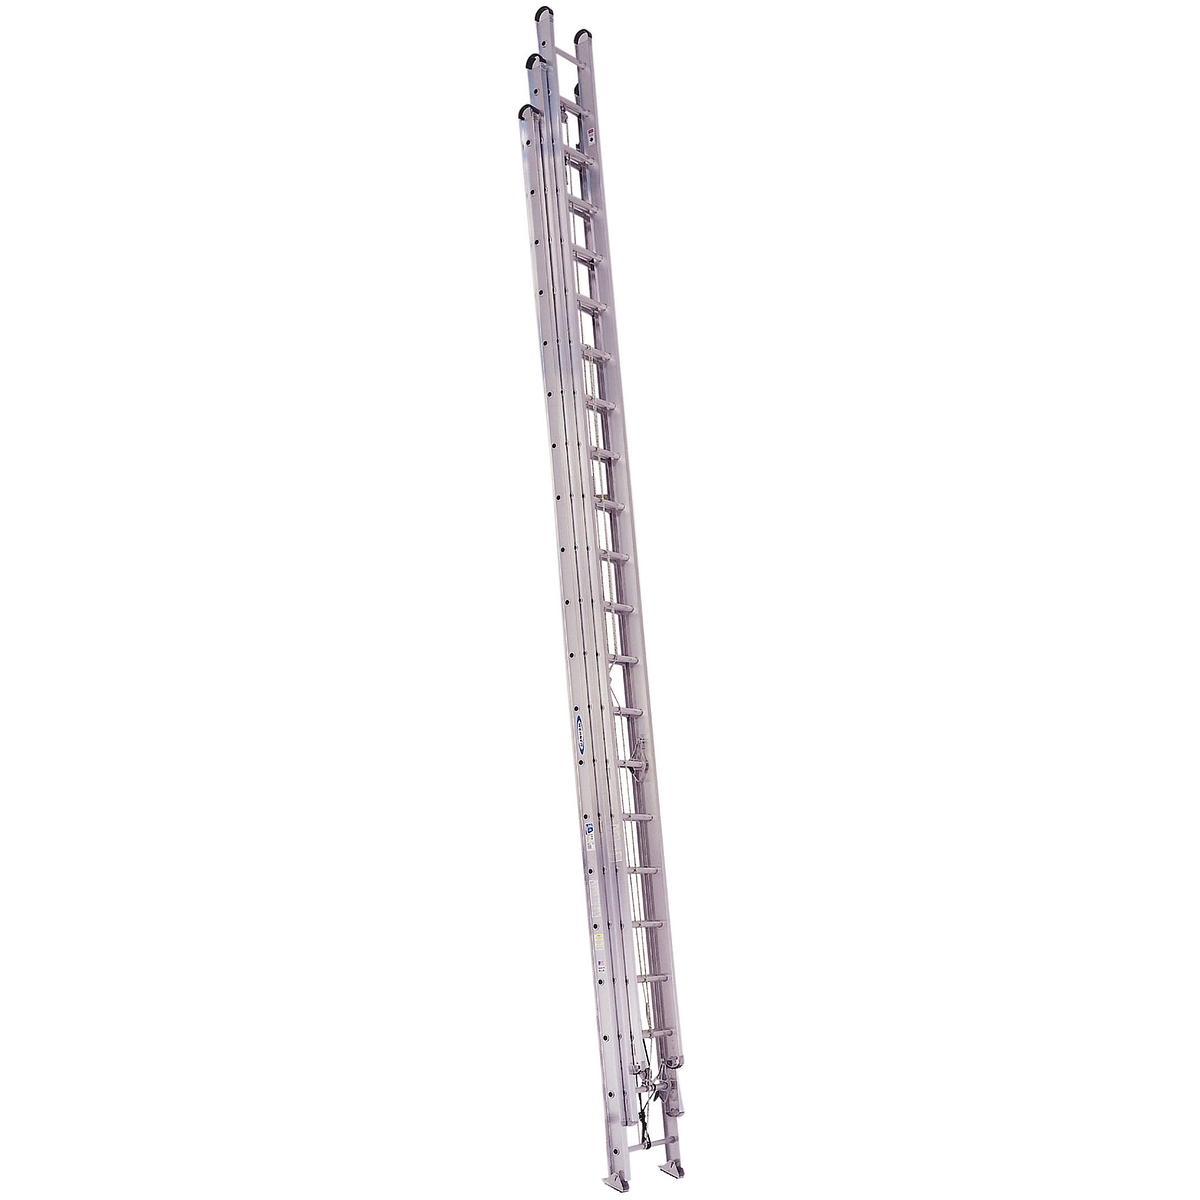 What Is The Maximum Length Of A Non-Self-Supporting Single Ladder